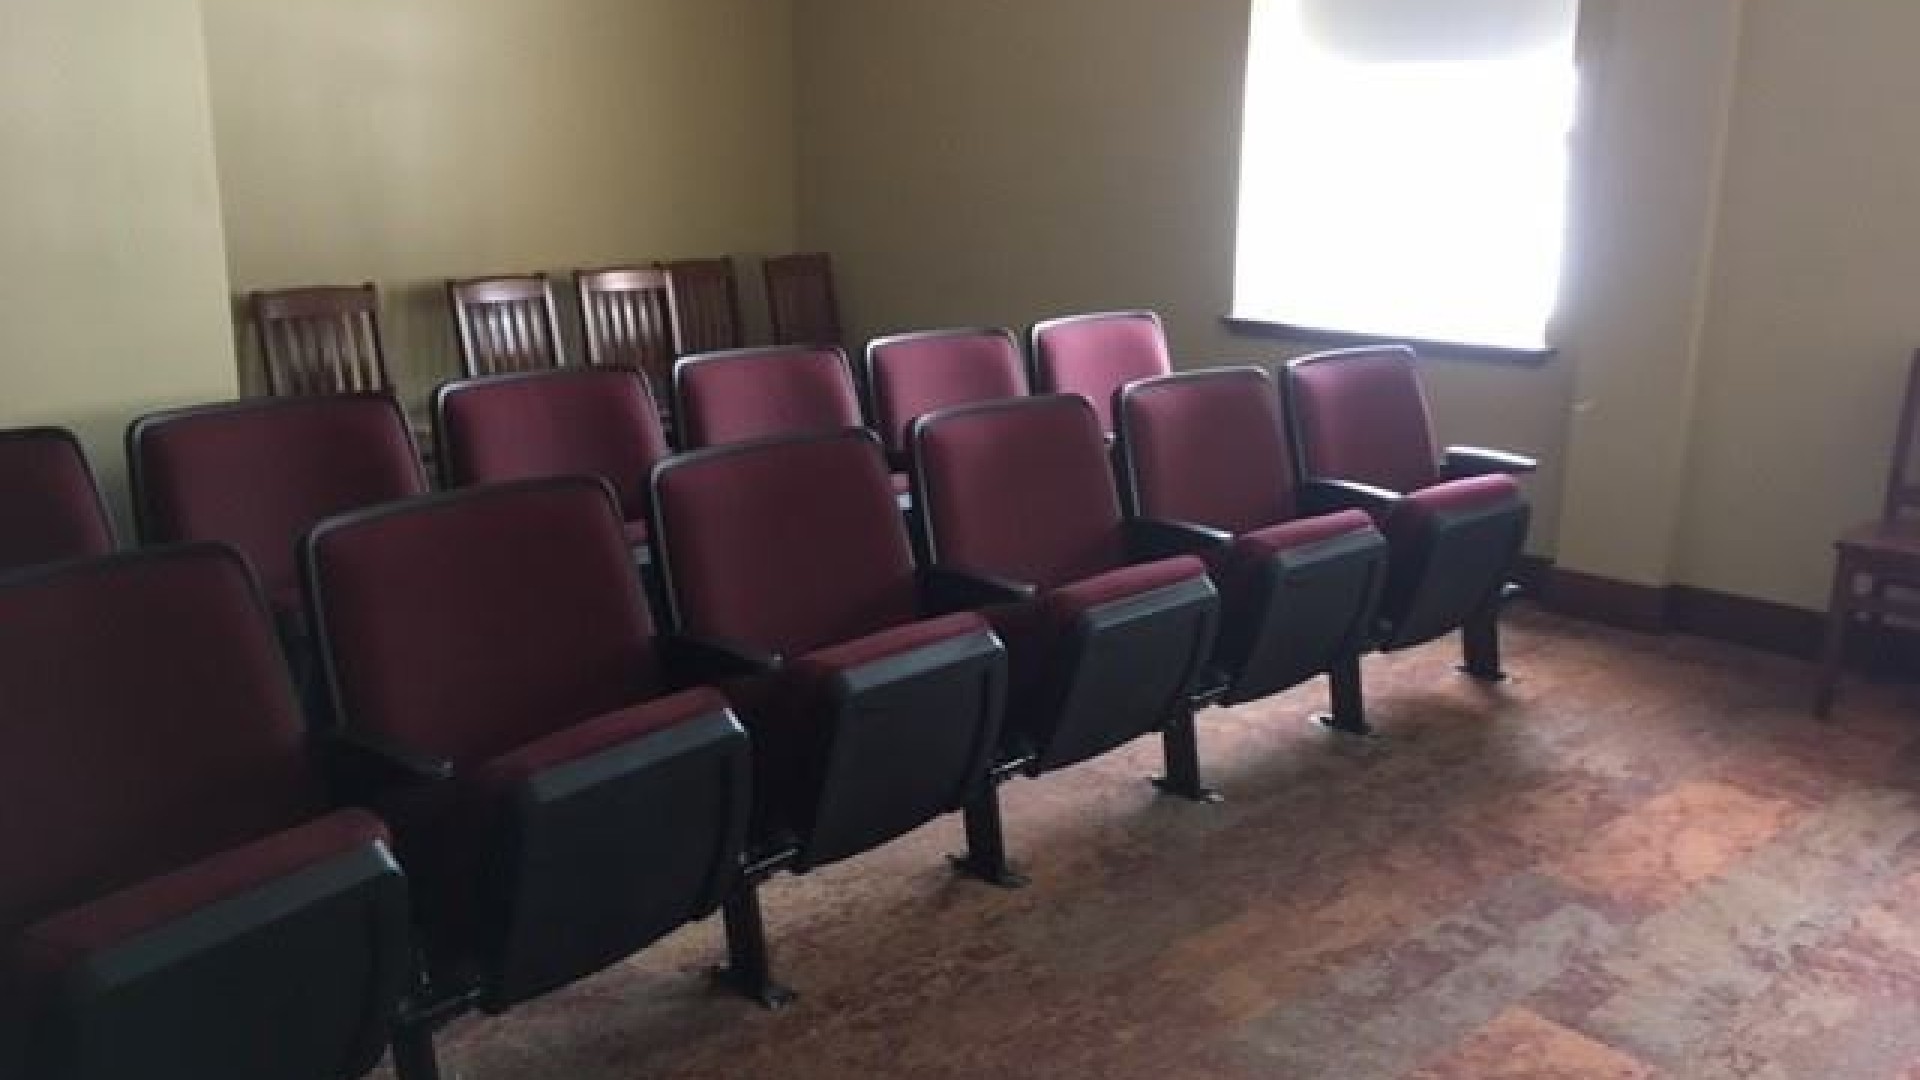 Movie room with red chairs 